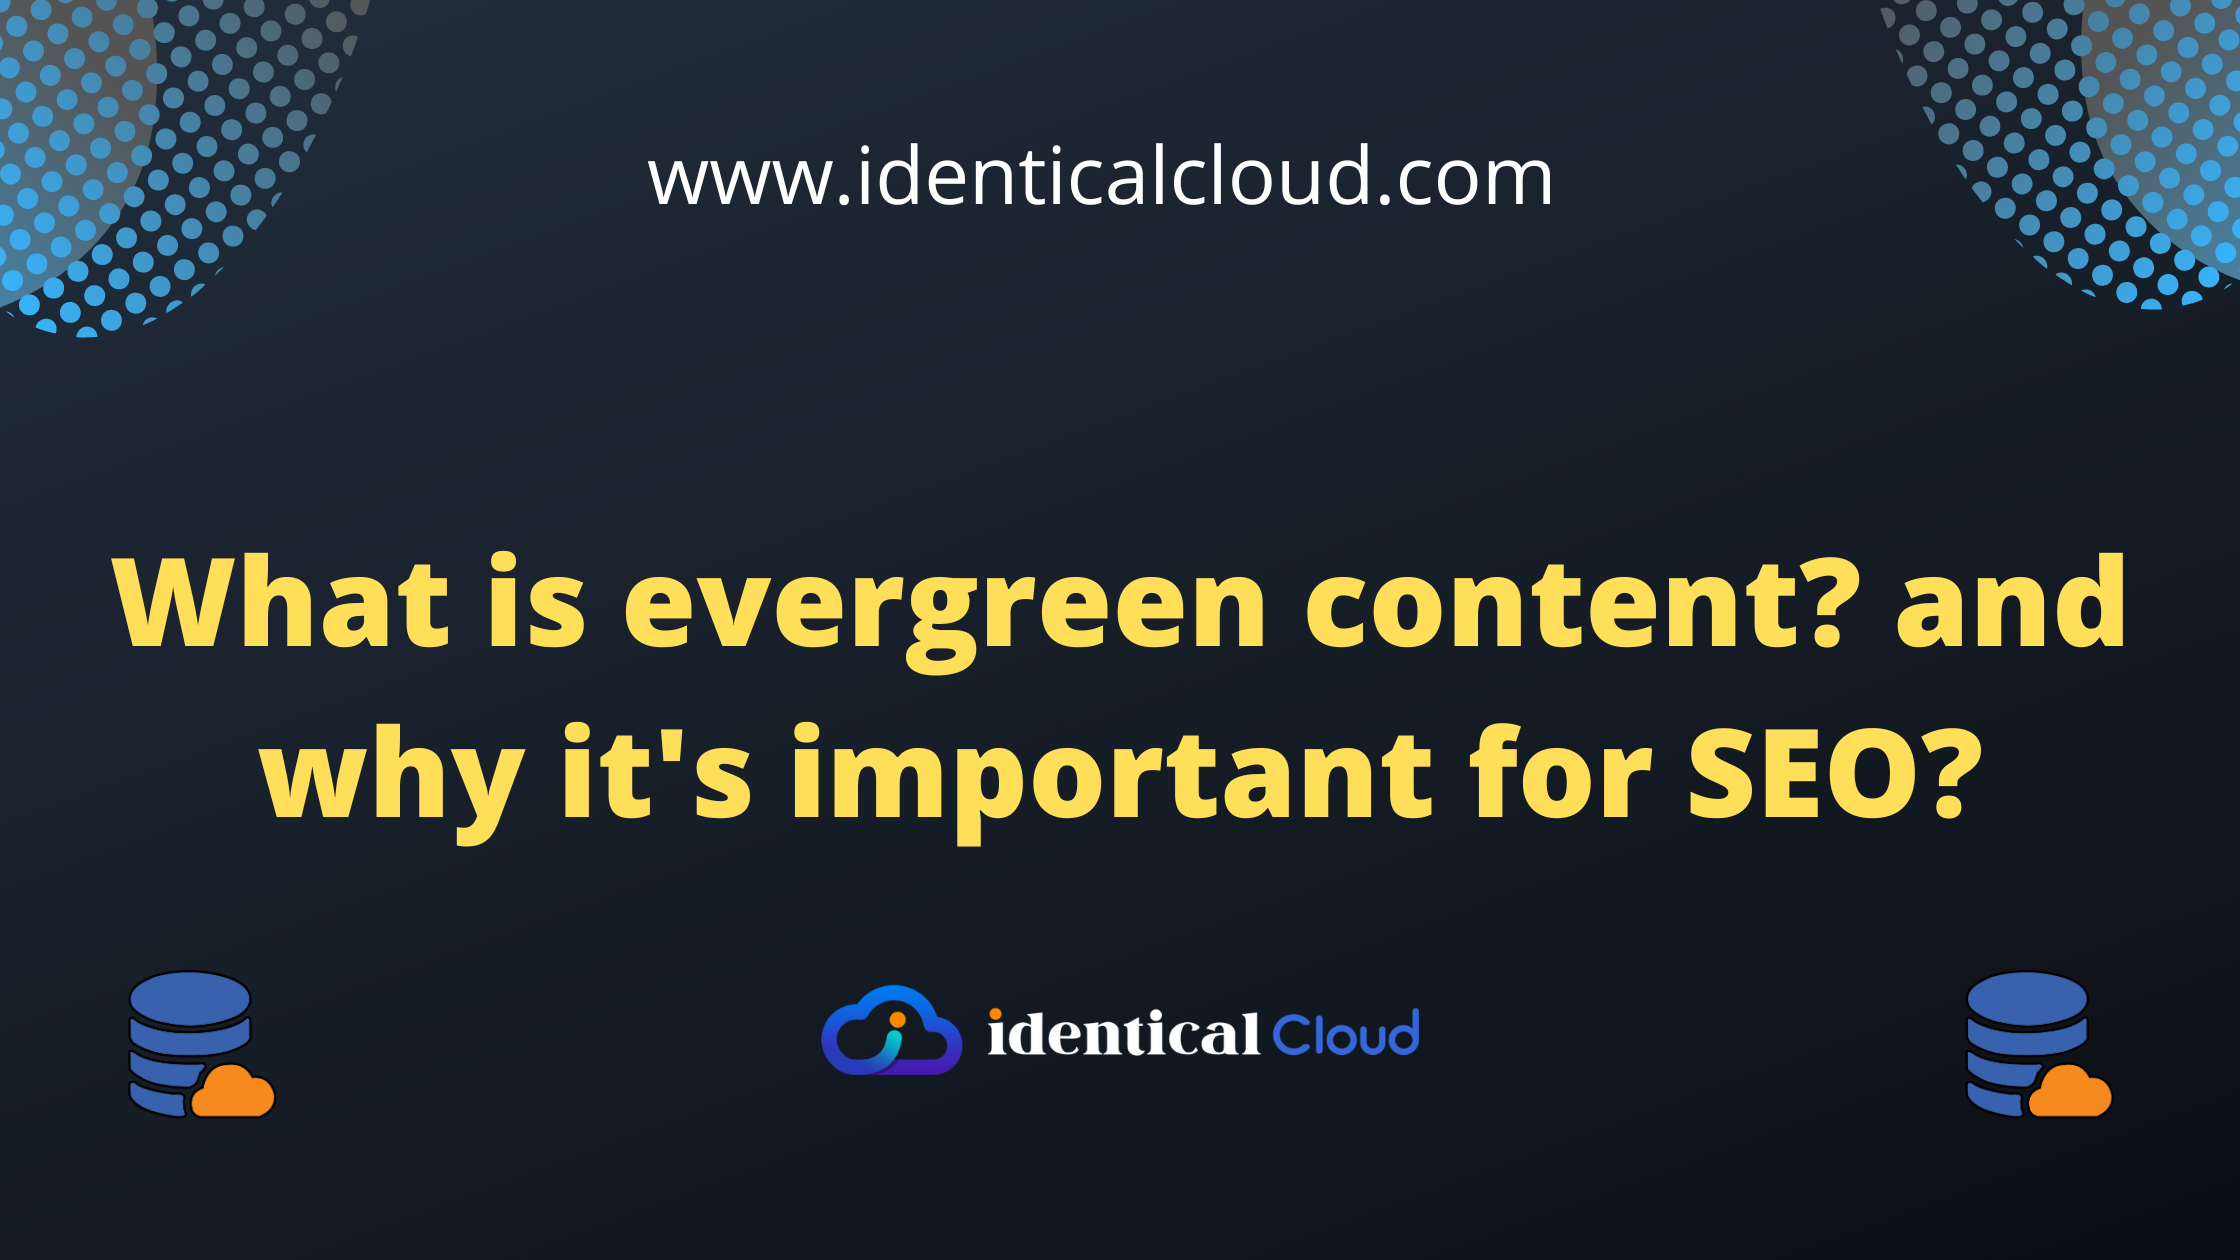 What is evergreen content and why it's important for SEO - identicalcloud.com